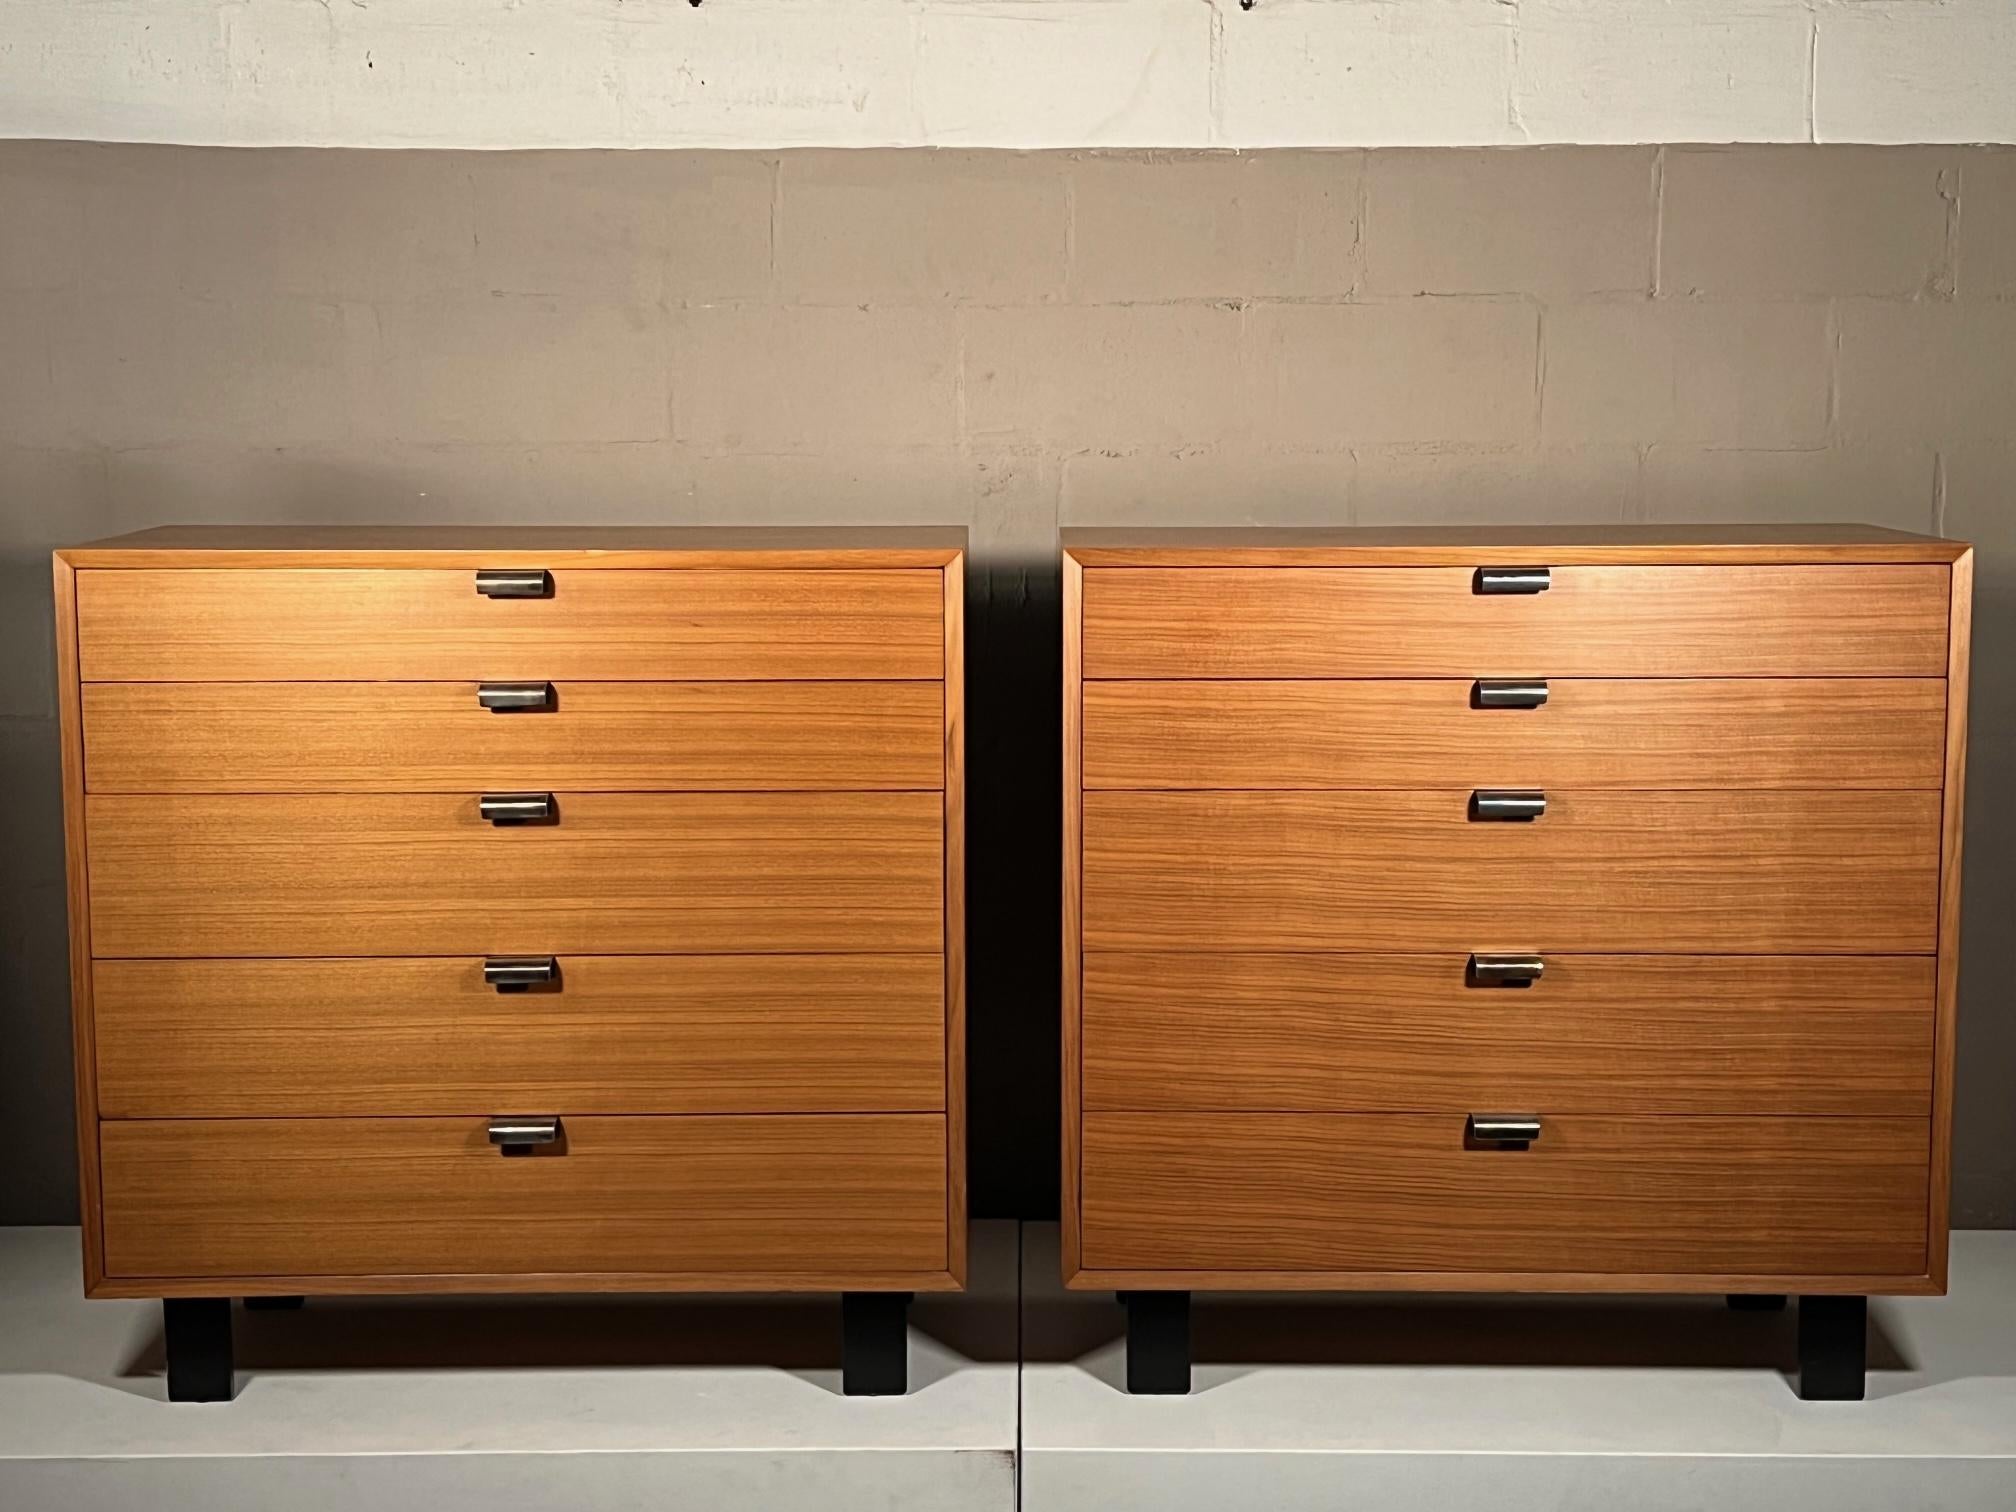 A pair of walnut George Nelson 5 drawer dressers with J shaped handles. Manufactured by Herman Miller from the Basic Cabinet Series in the 1950's. This particular pair is very clean with lighter walnut finish and clear wavy graining. Original